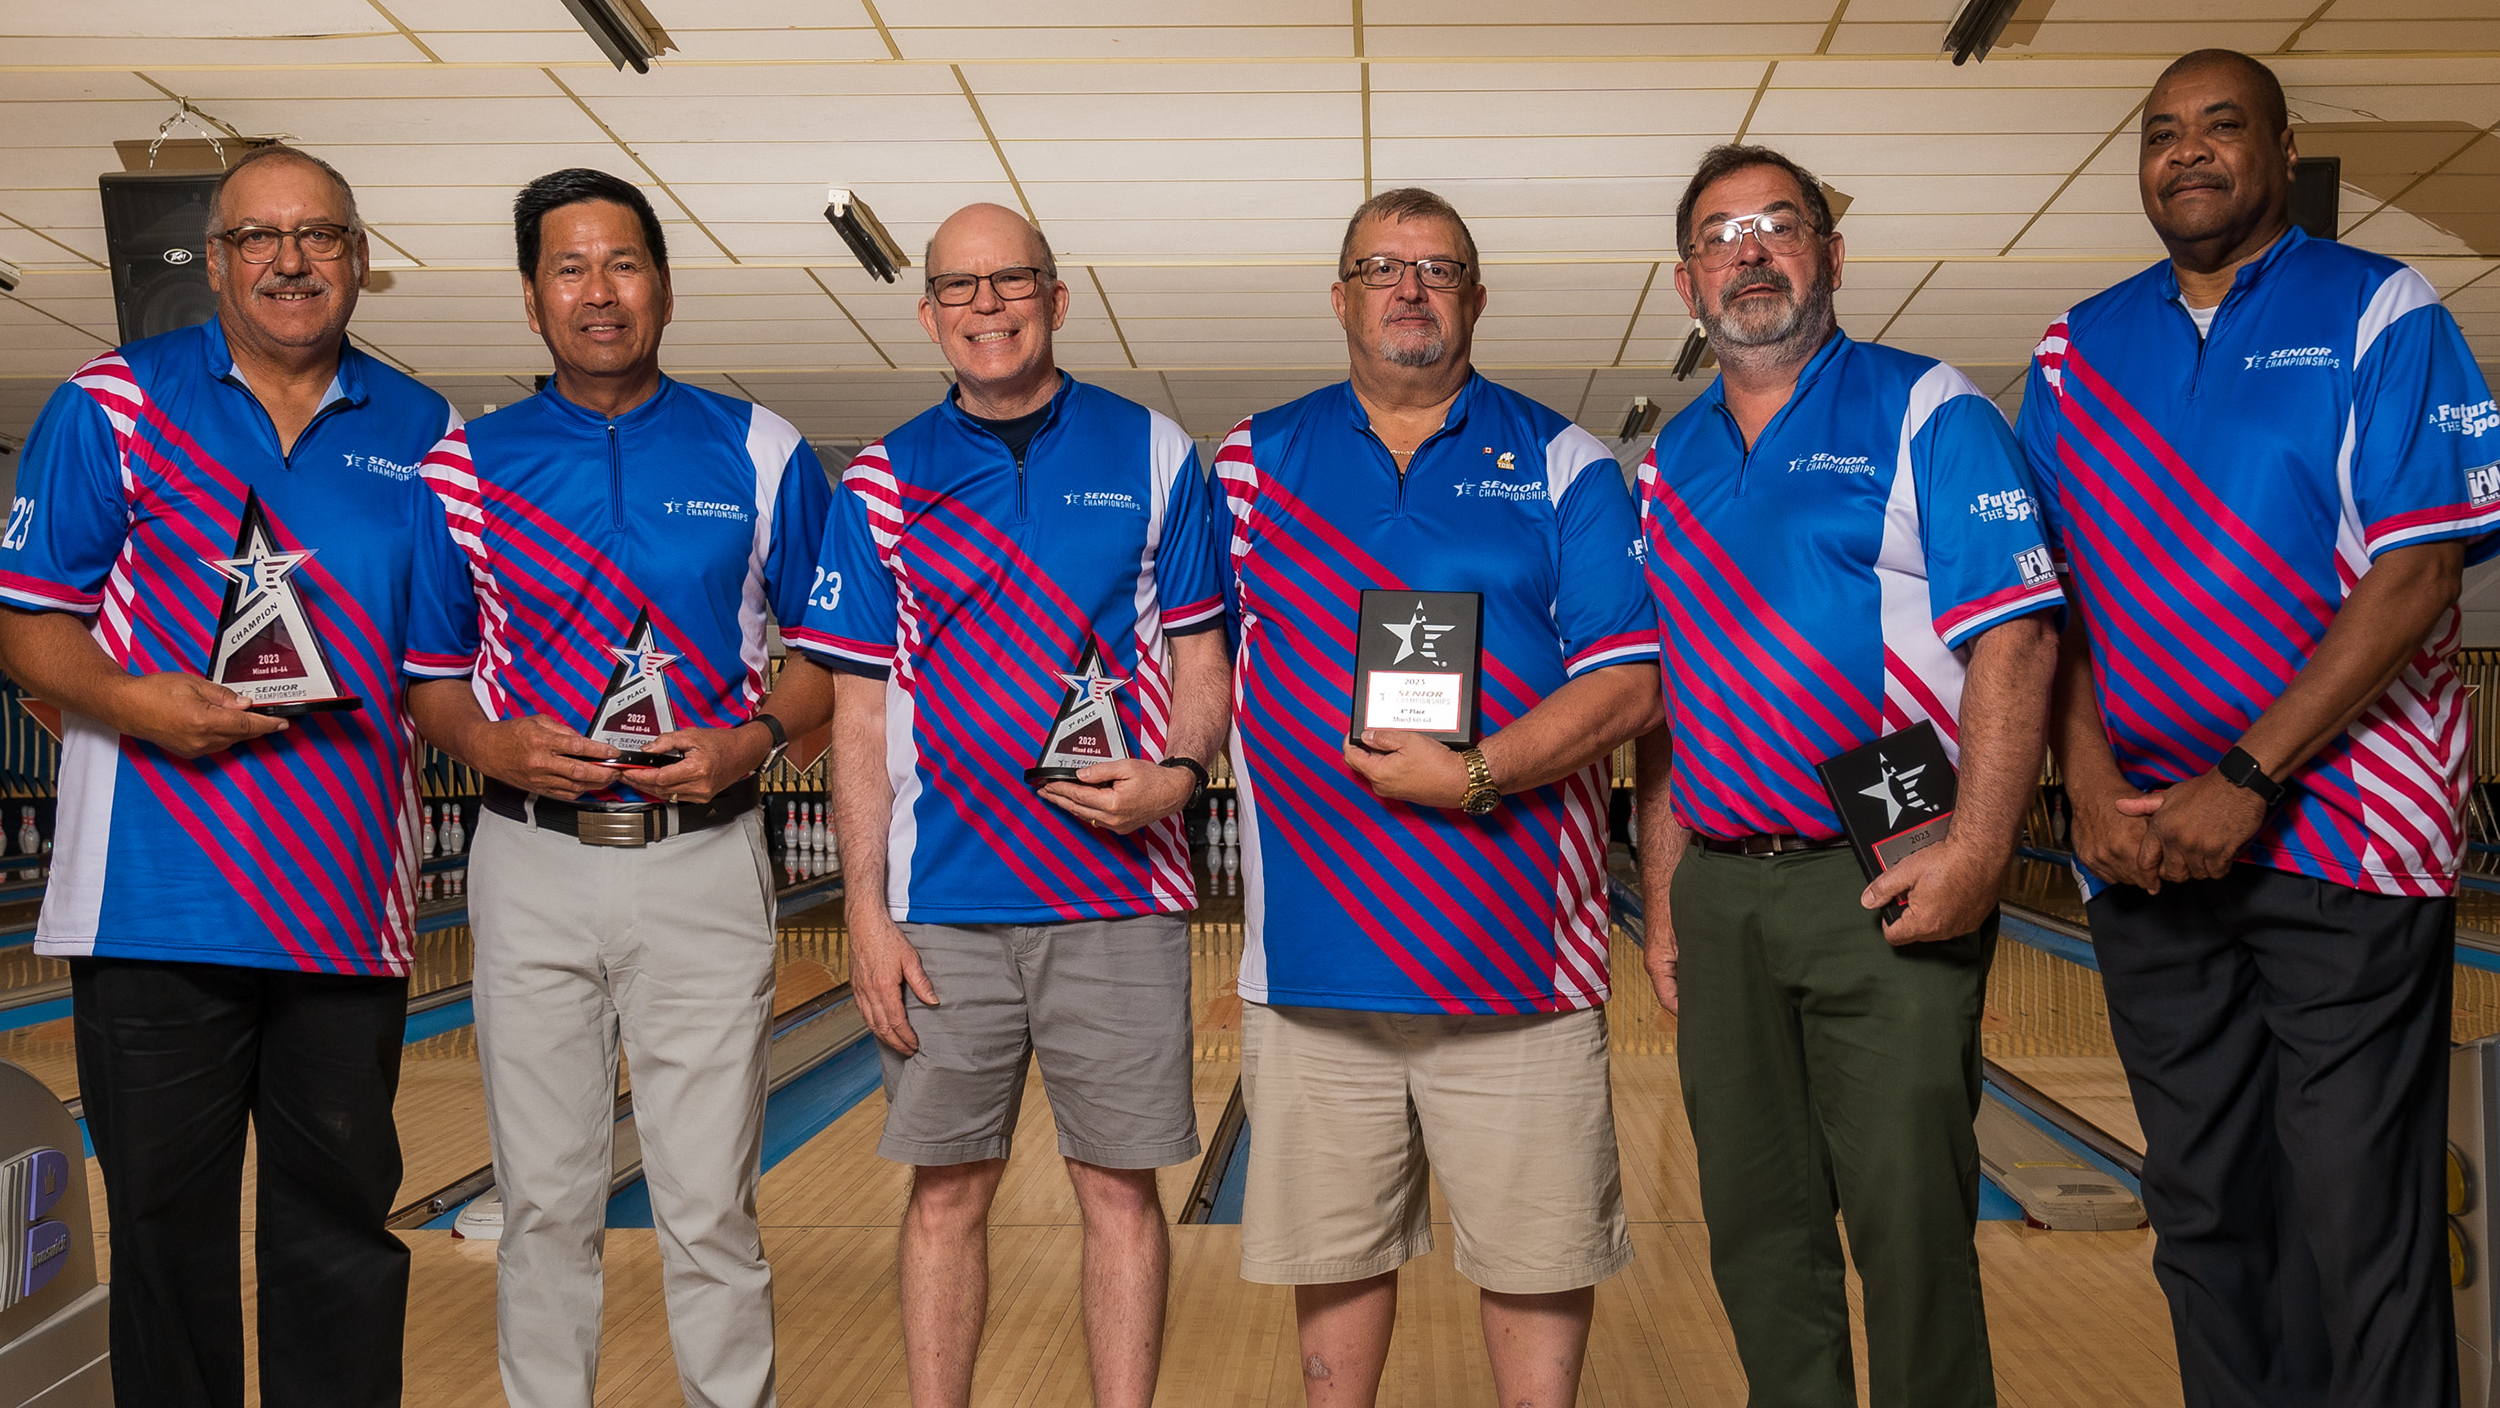 The top six finishers in Mixed 60-64 at the 2023 USBC Senior Championships.